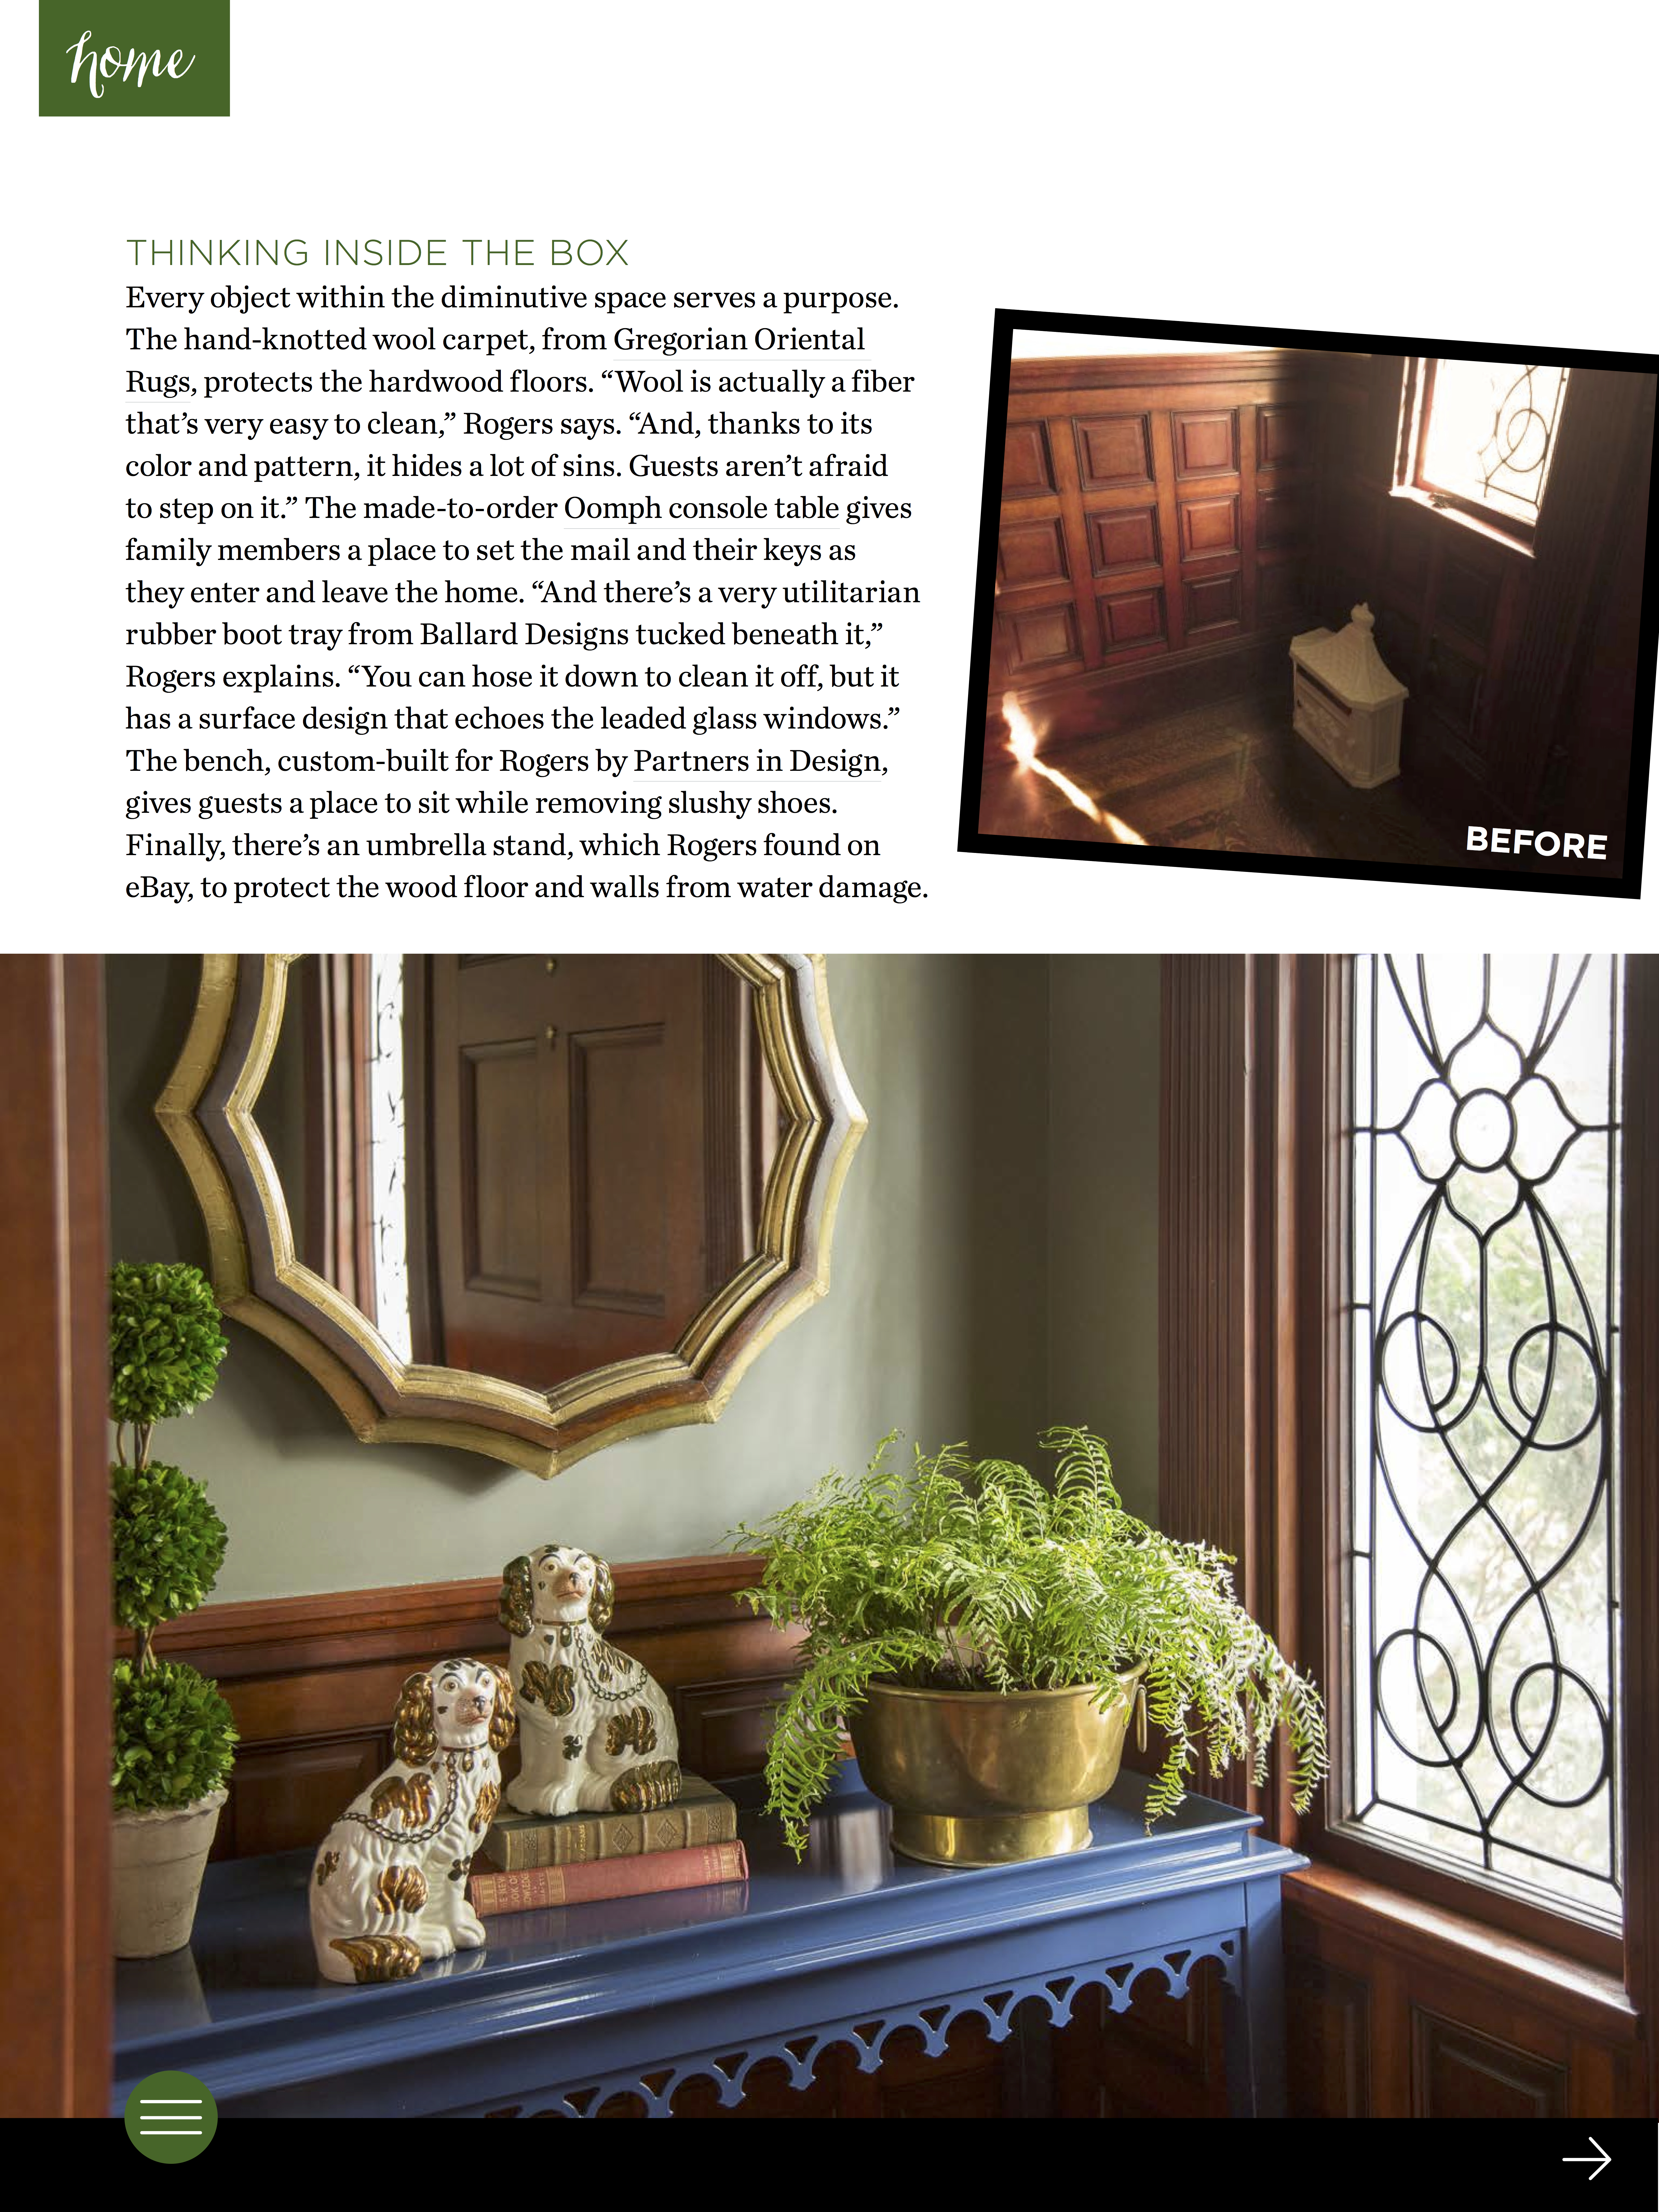 Kelly Rogers Interiors | Interiors for Families | 11/2015 Three Magazine Feature